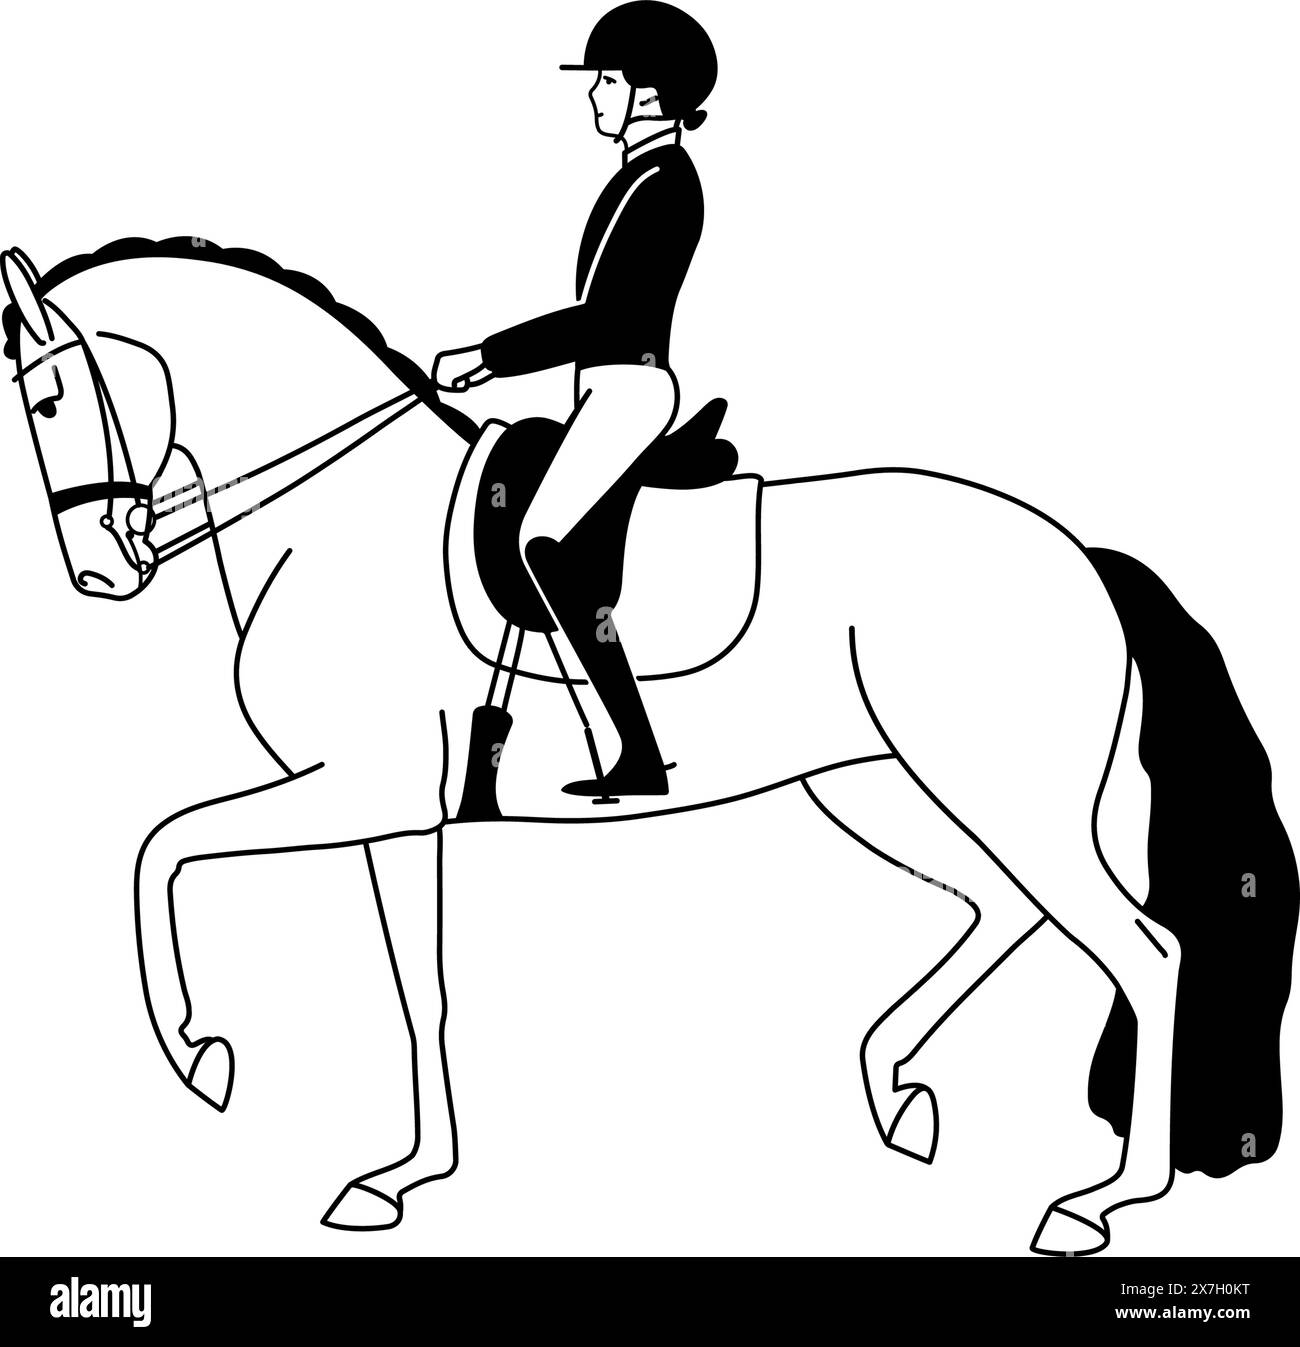 Black and white concise image of a dressage rider on a horse. Vector illustration Stock Vector